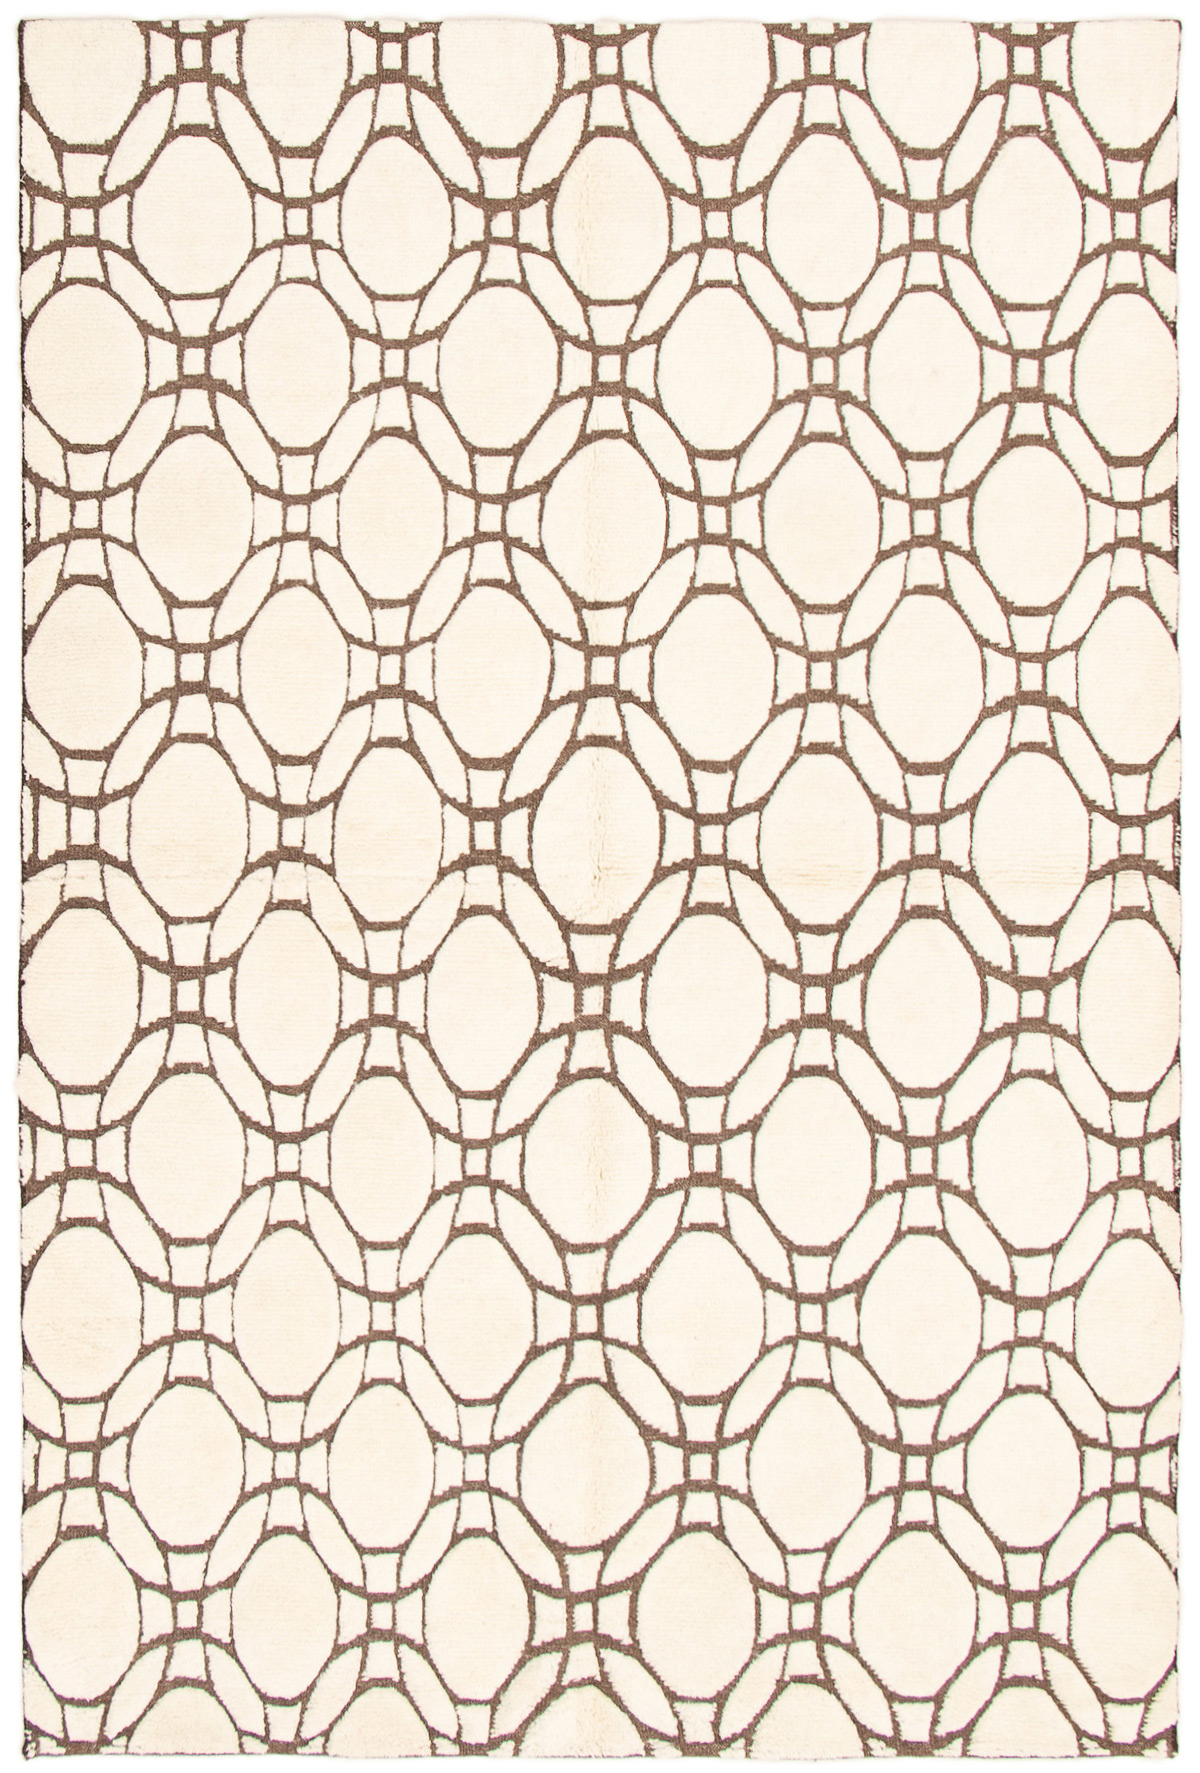 Hand-knotted Arlequin Cream Wool Rug 6'0" x 9'0"  Size: 6'0" x 9'0"  